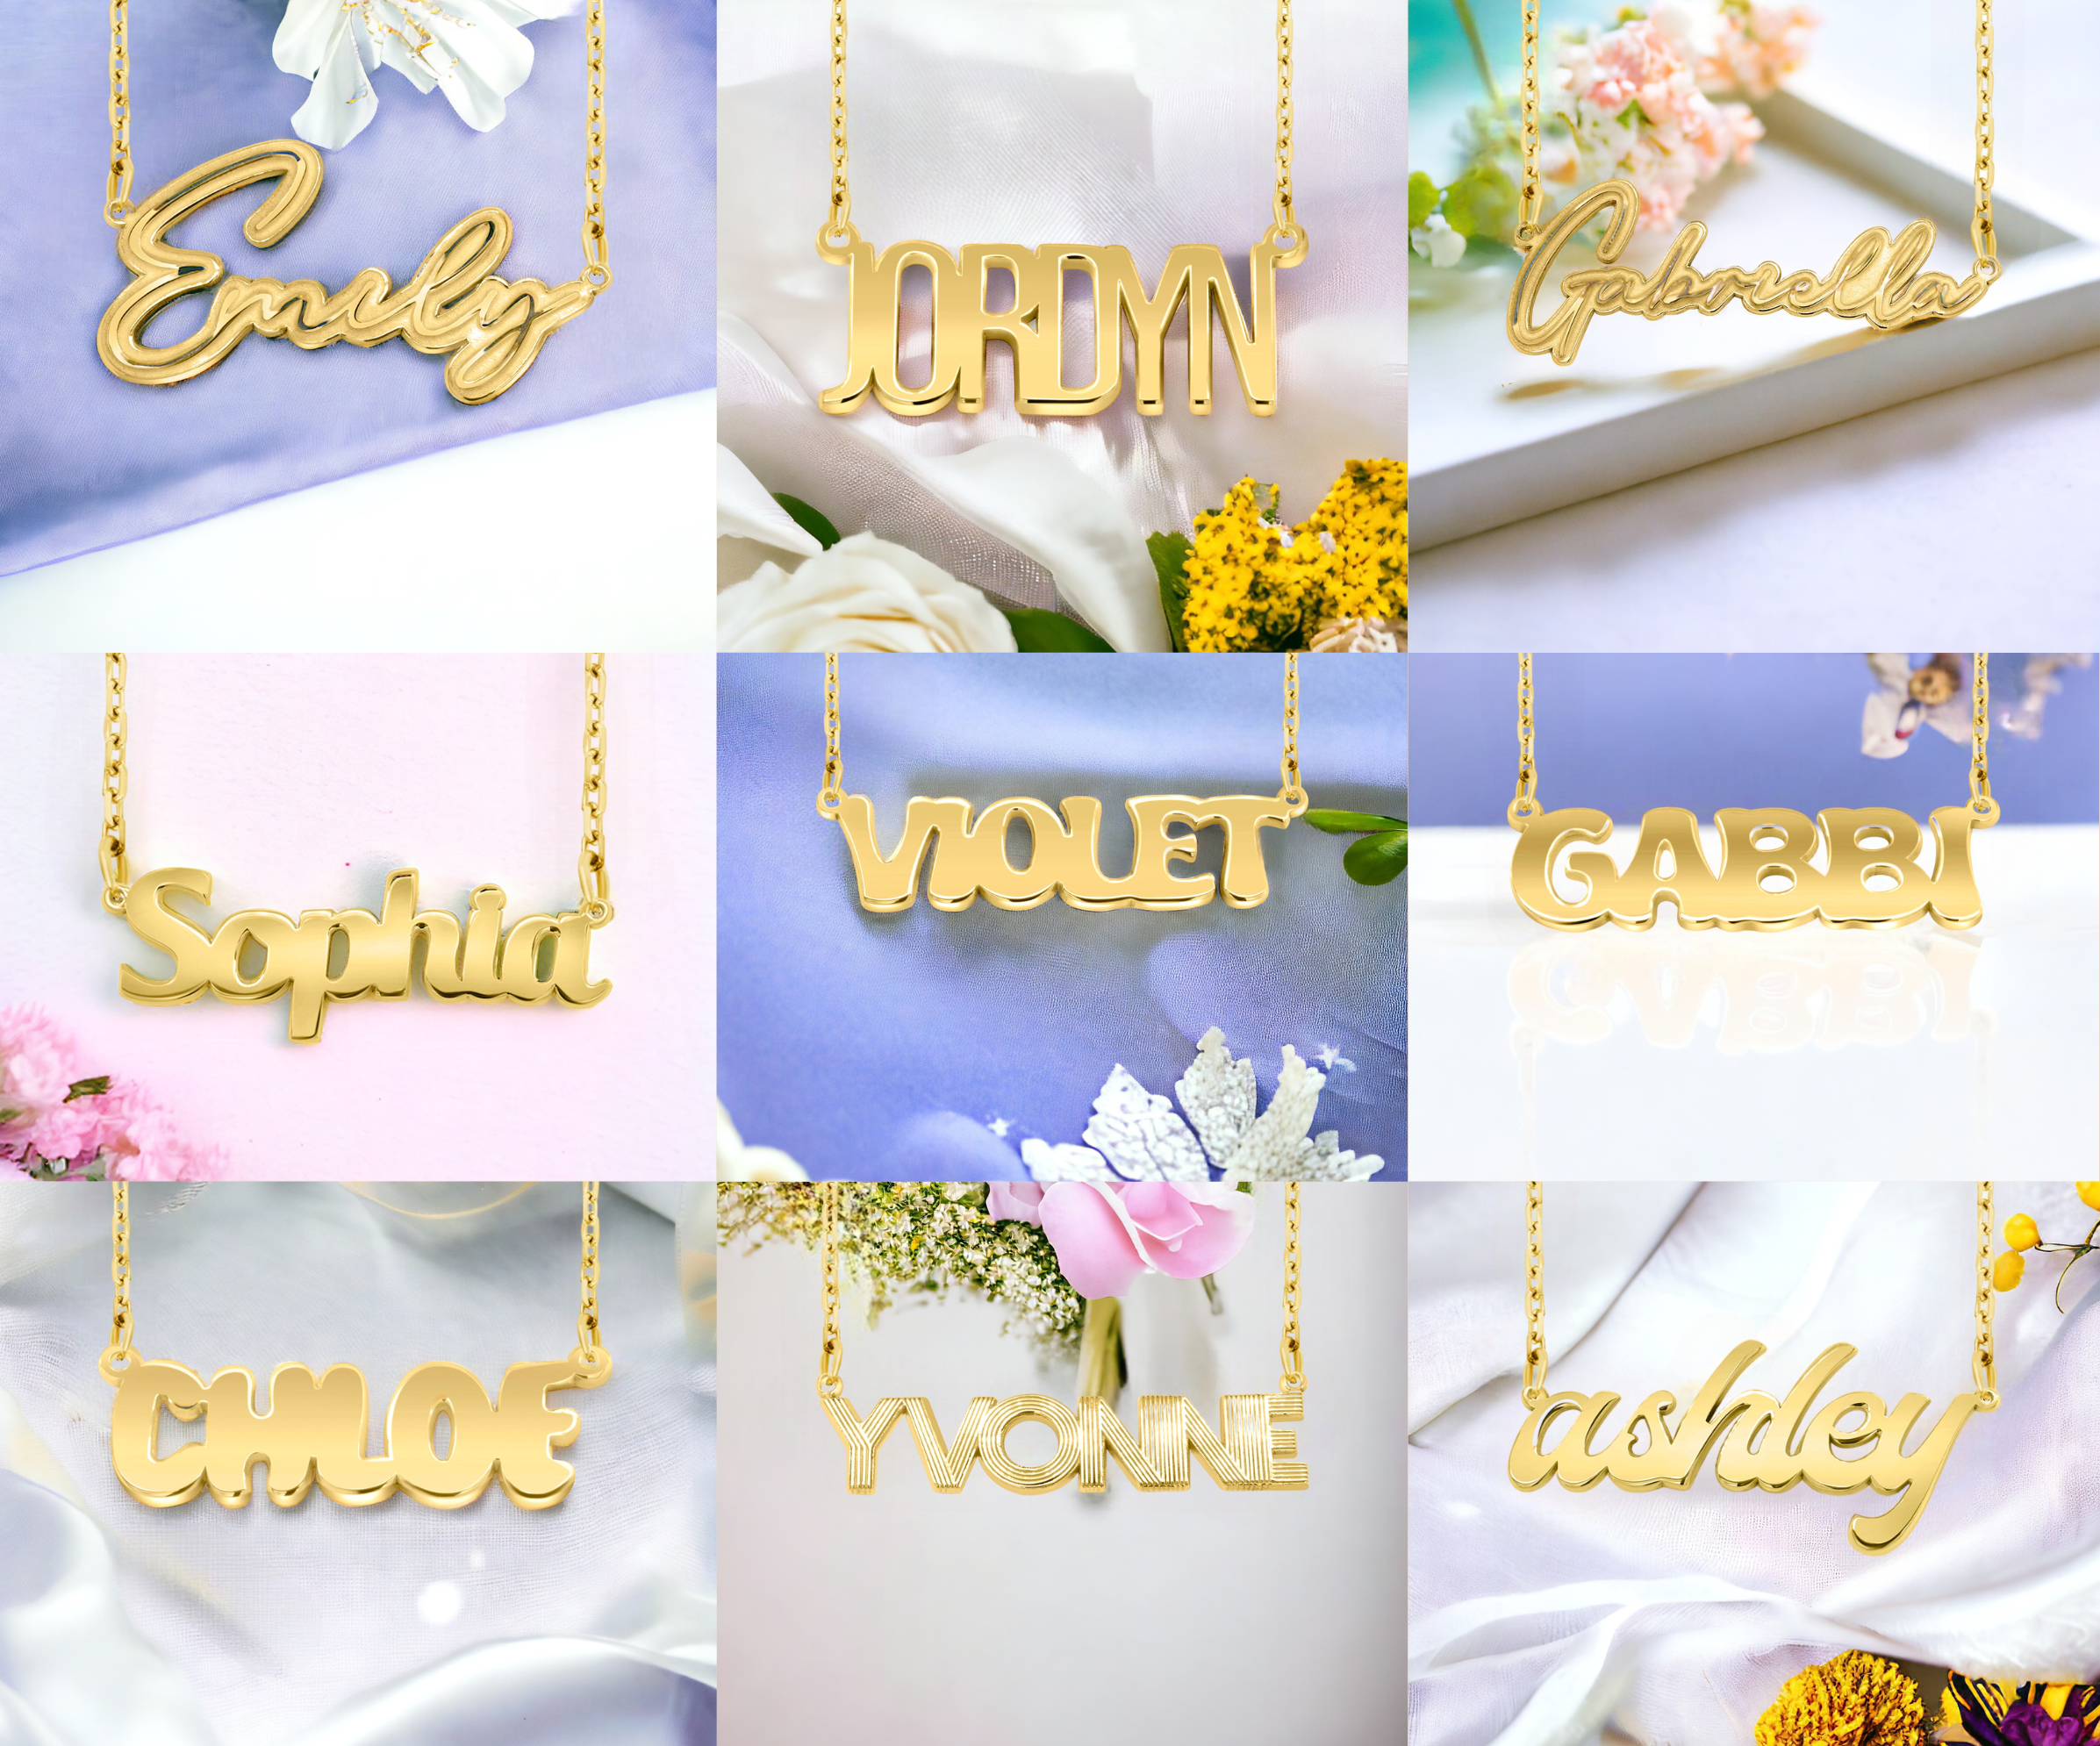 Set of nameplates made by AJ's Jewelry